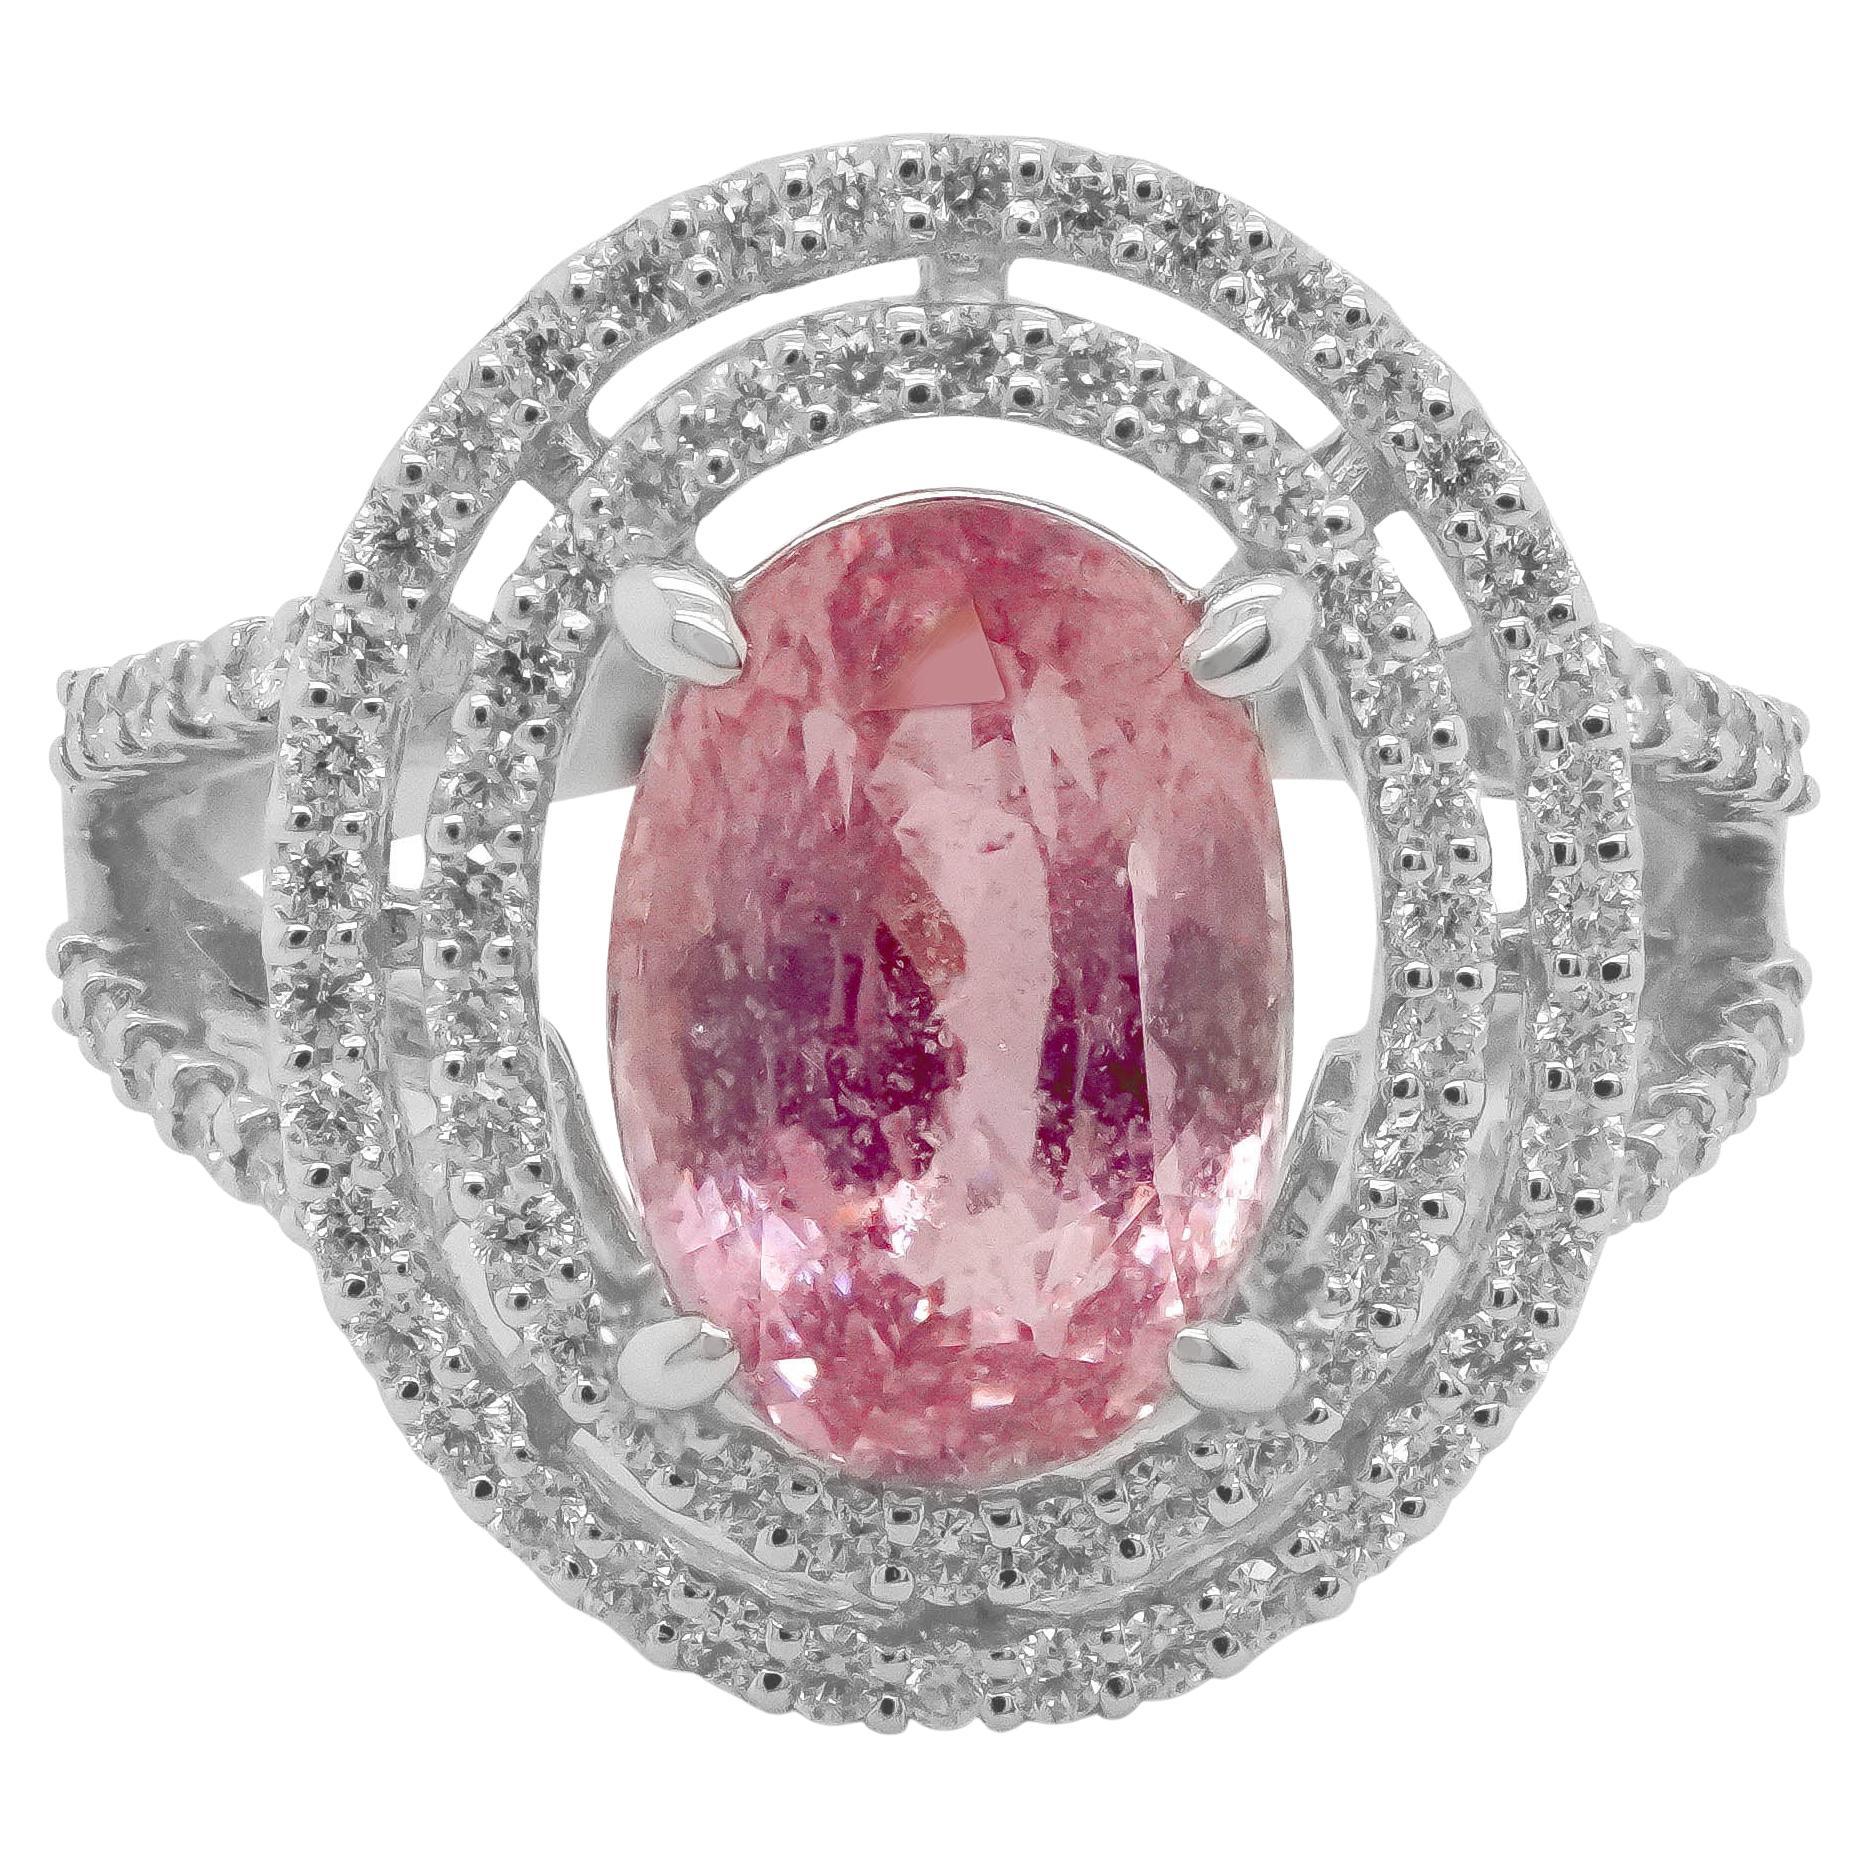 3.51 Carat Padparadscha Sapphire Sunset Color Solitaire Ring